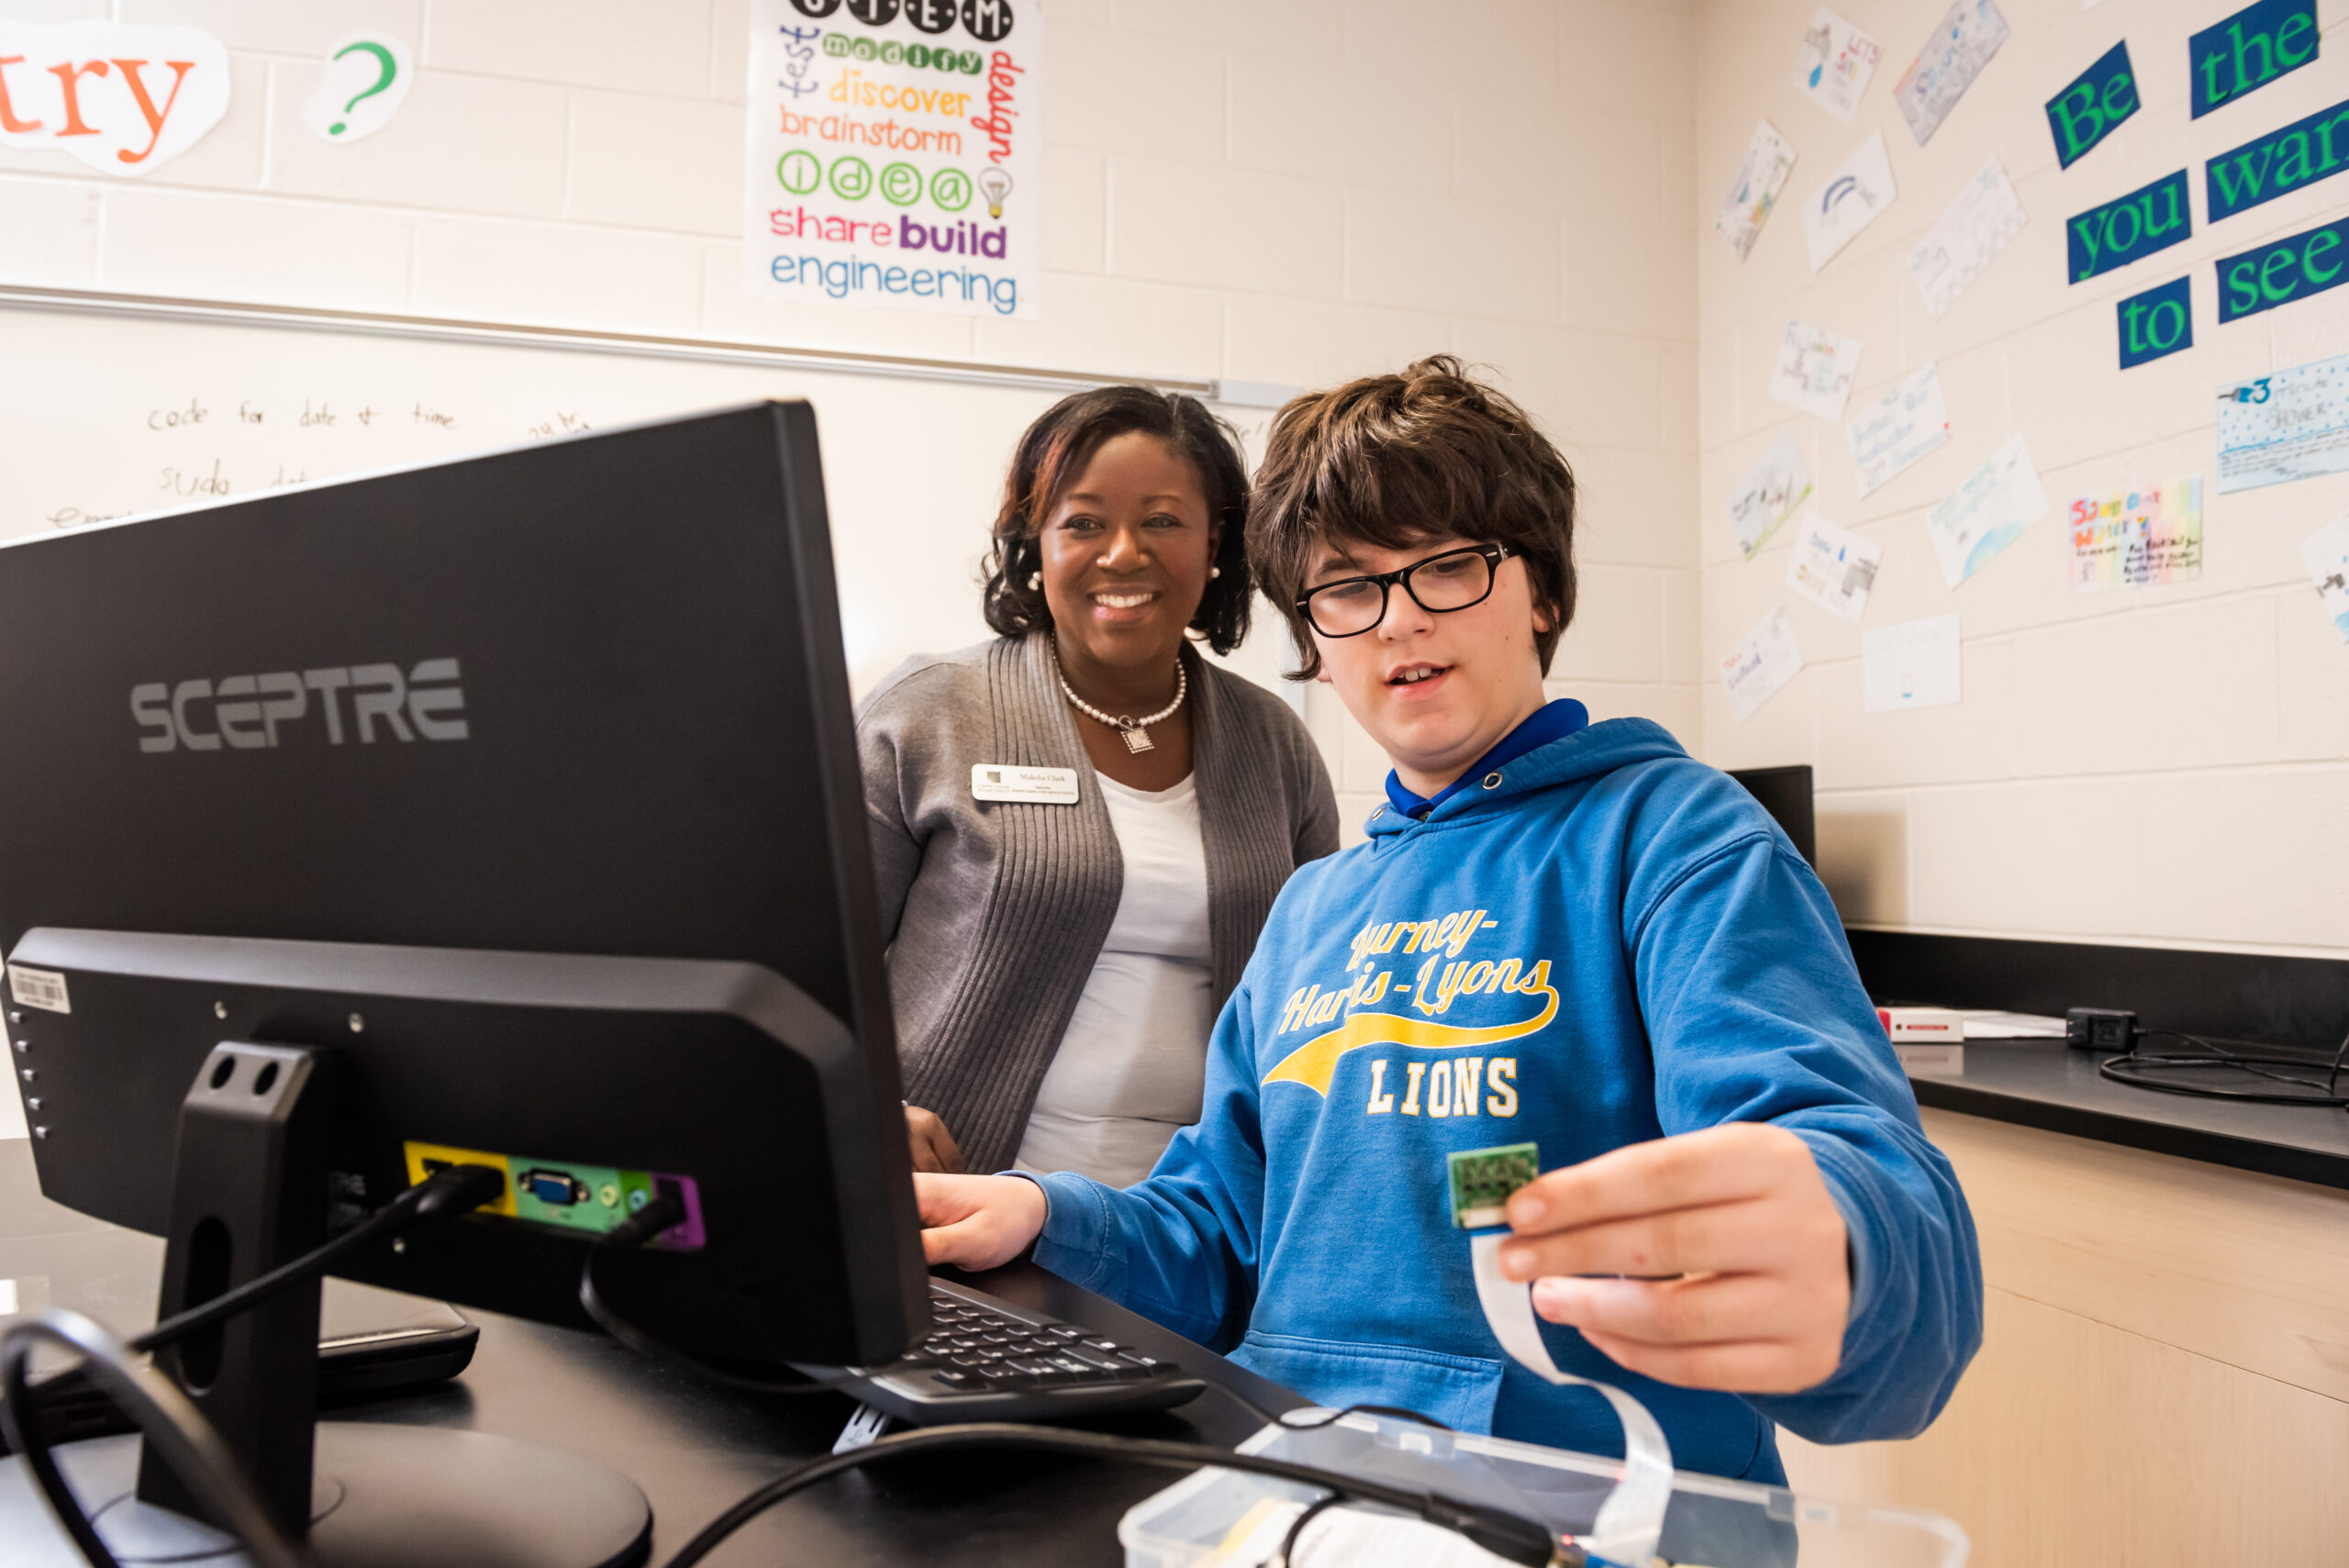 A woman teacher helps a young person with a coding project.